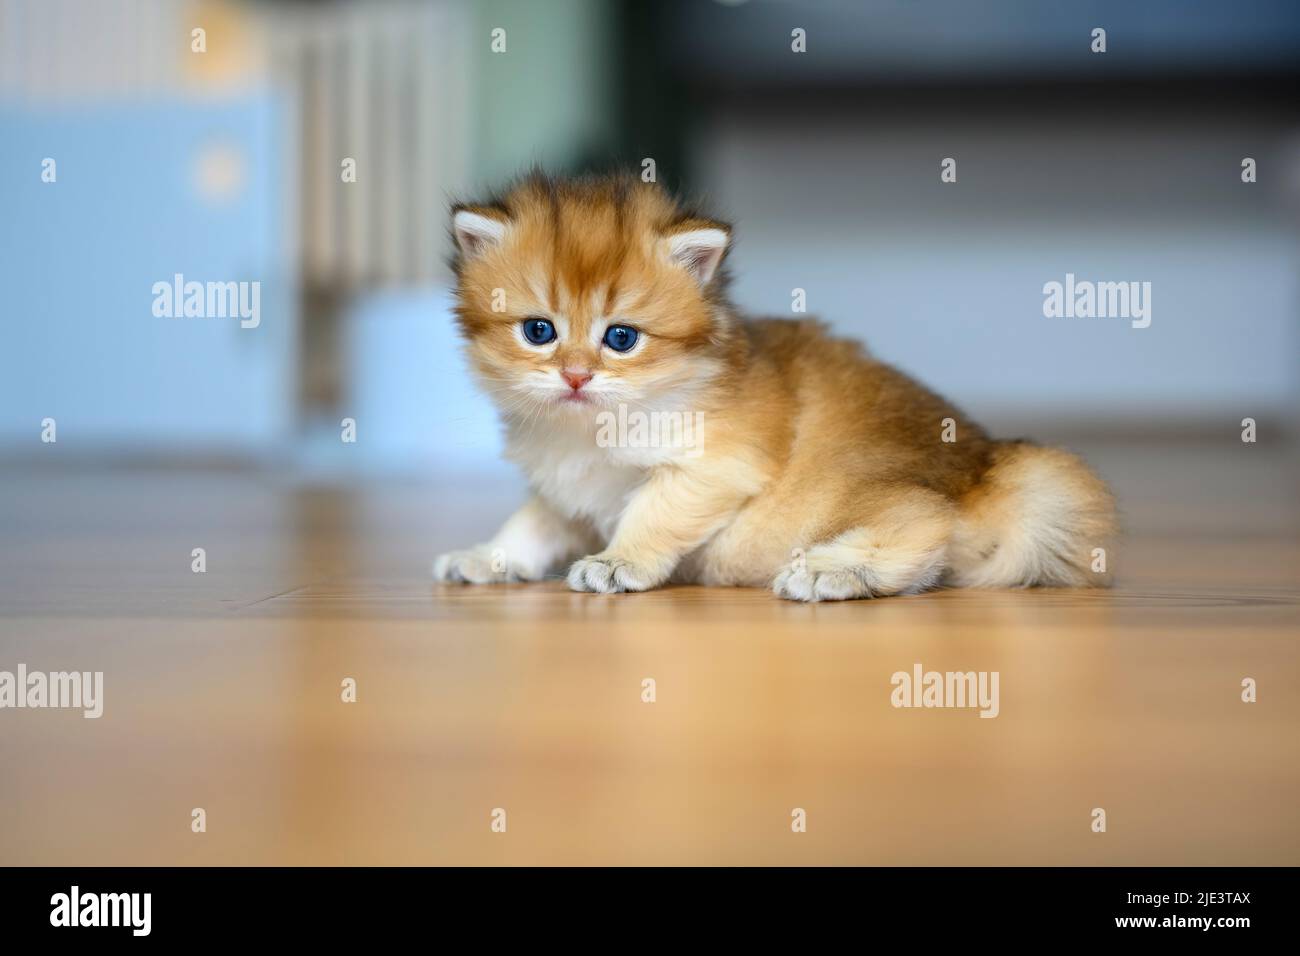 Golden British Shorthair kitten crawls on a wooden floor in a room in the house. little cat learning to walk front view. Childhood cats are mischievou Stock Photo